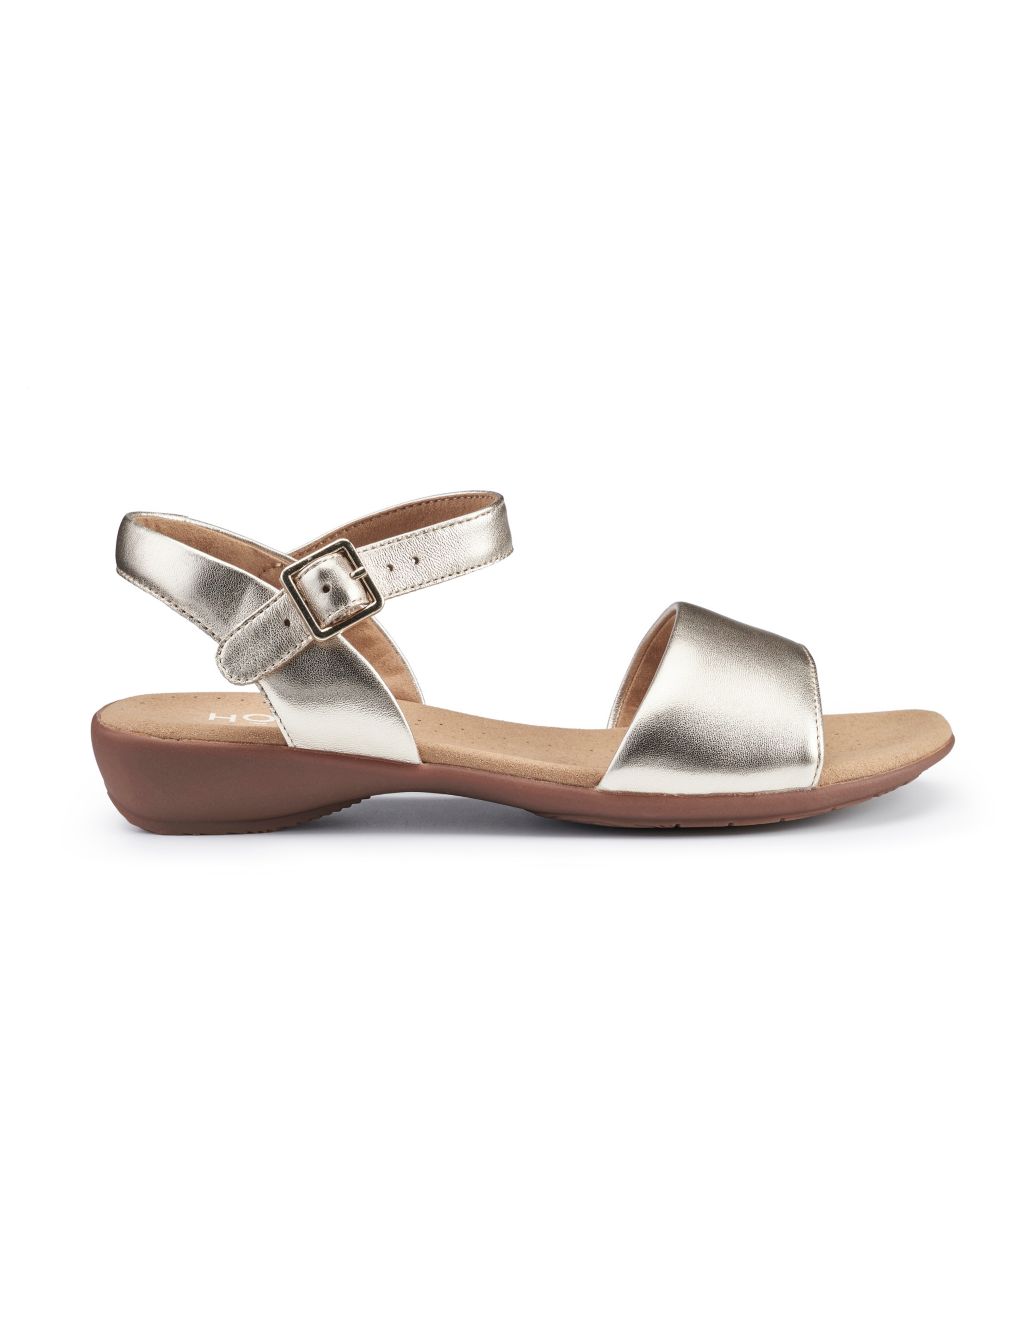 Tropic Leather Ankle Strap Sandals